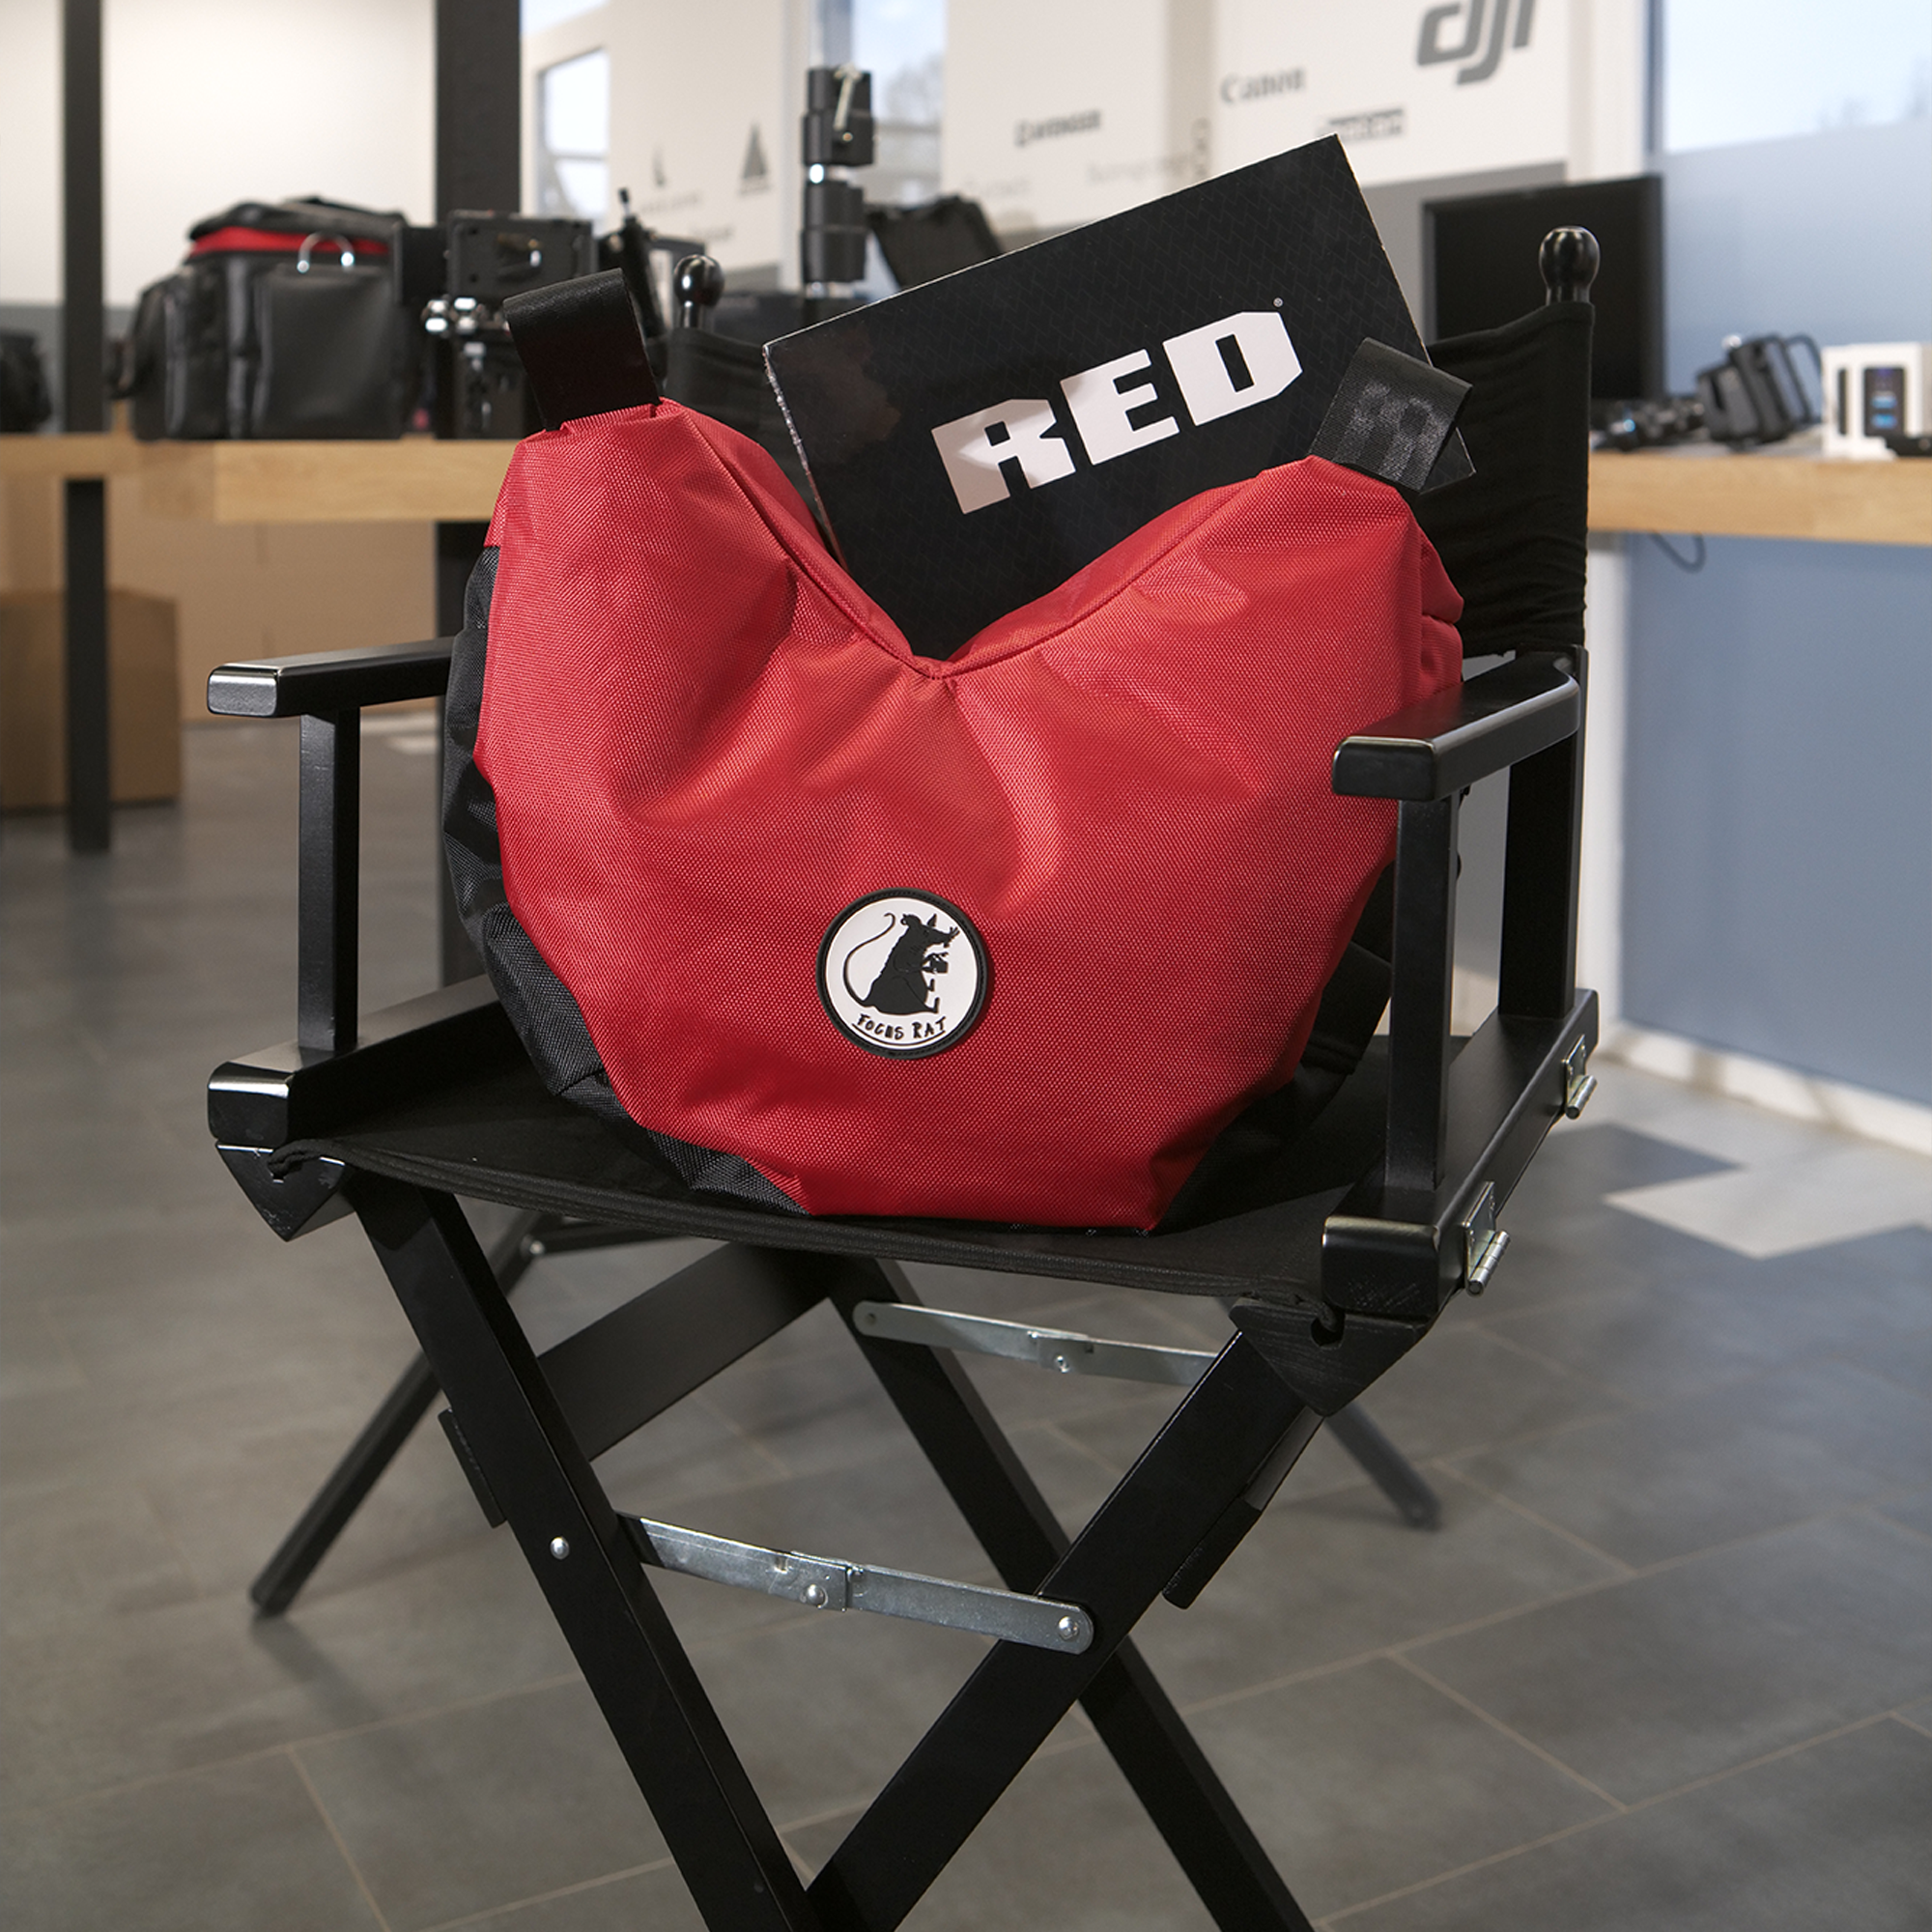 Customizable Professional Steady bag (Steady Saddle) A Large Ruby Red Bag on top of the directors chair